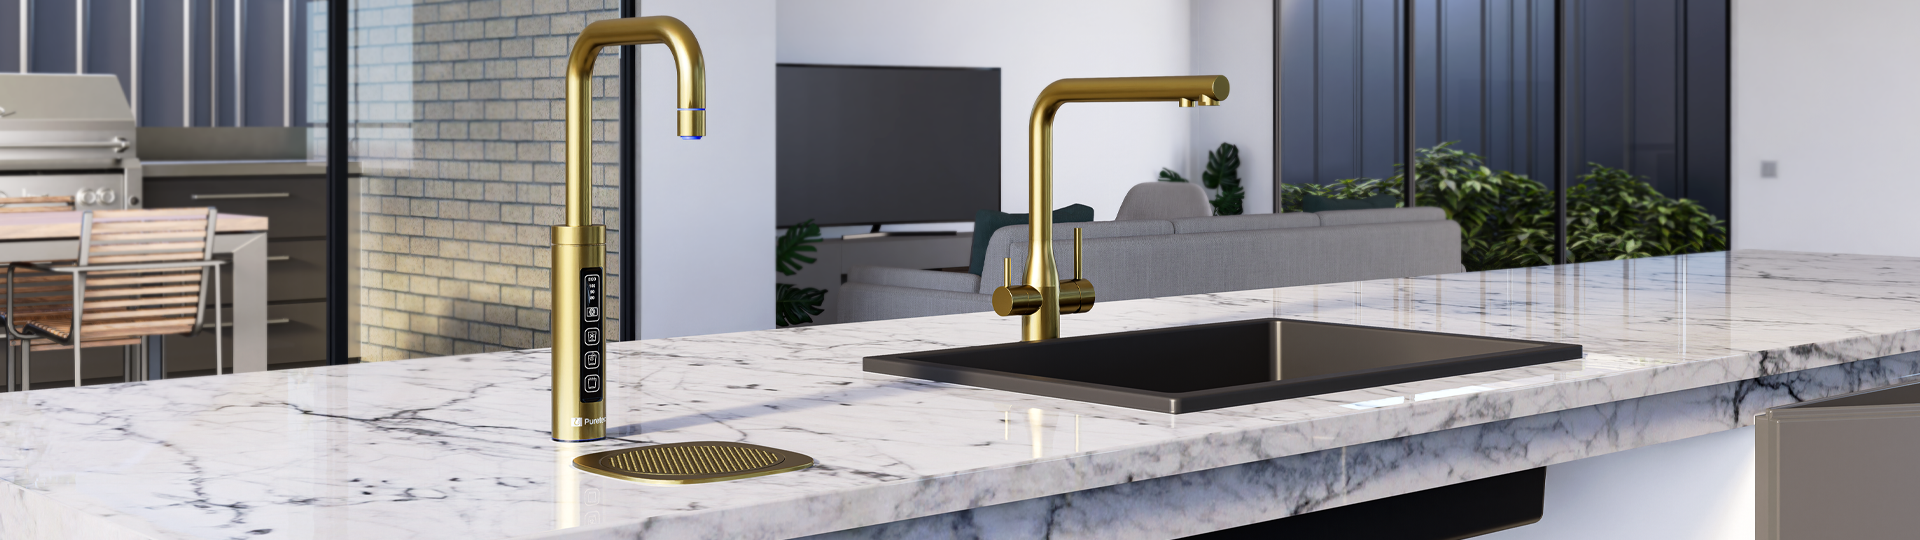 Marble countertop with black sink and gold mixer as well as gold filtered water tap